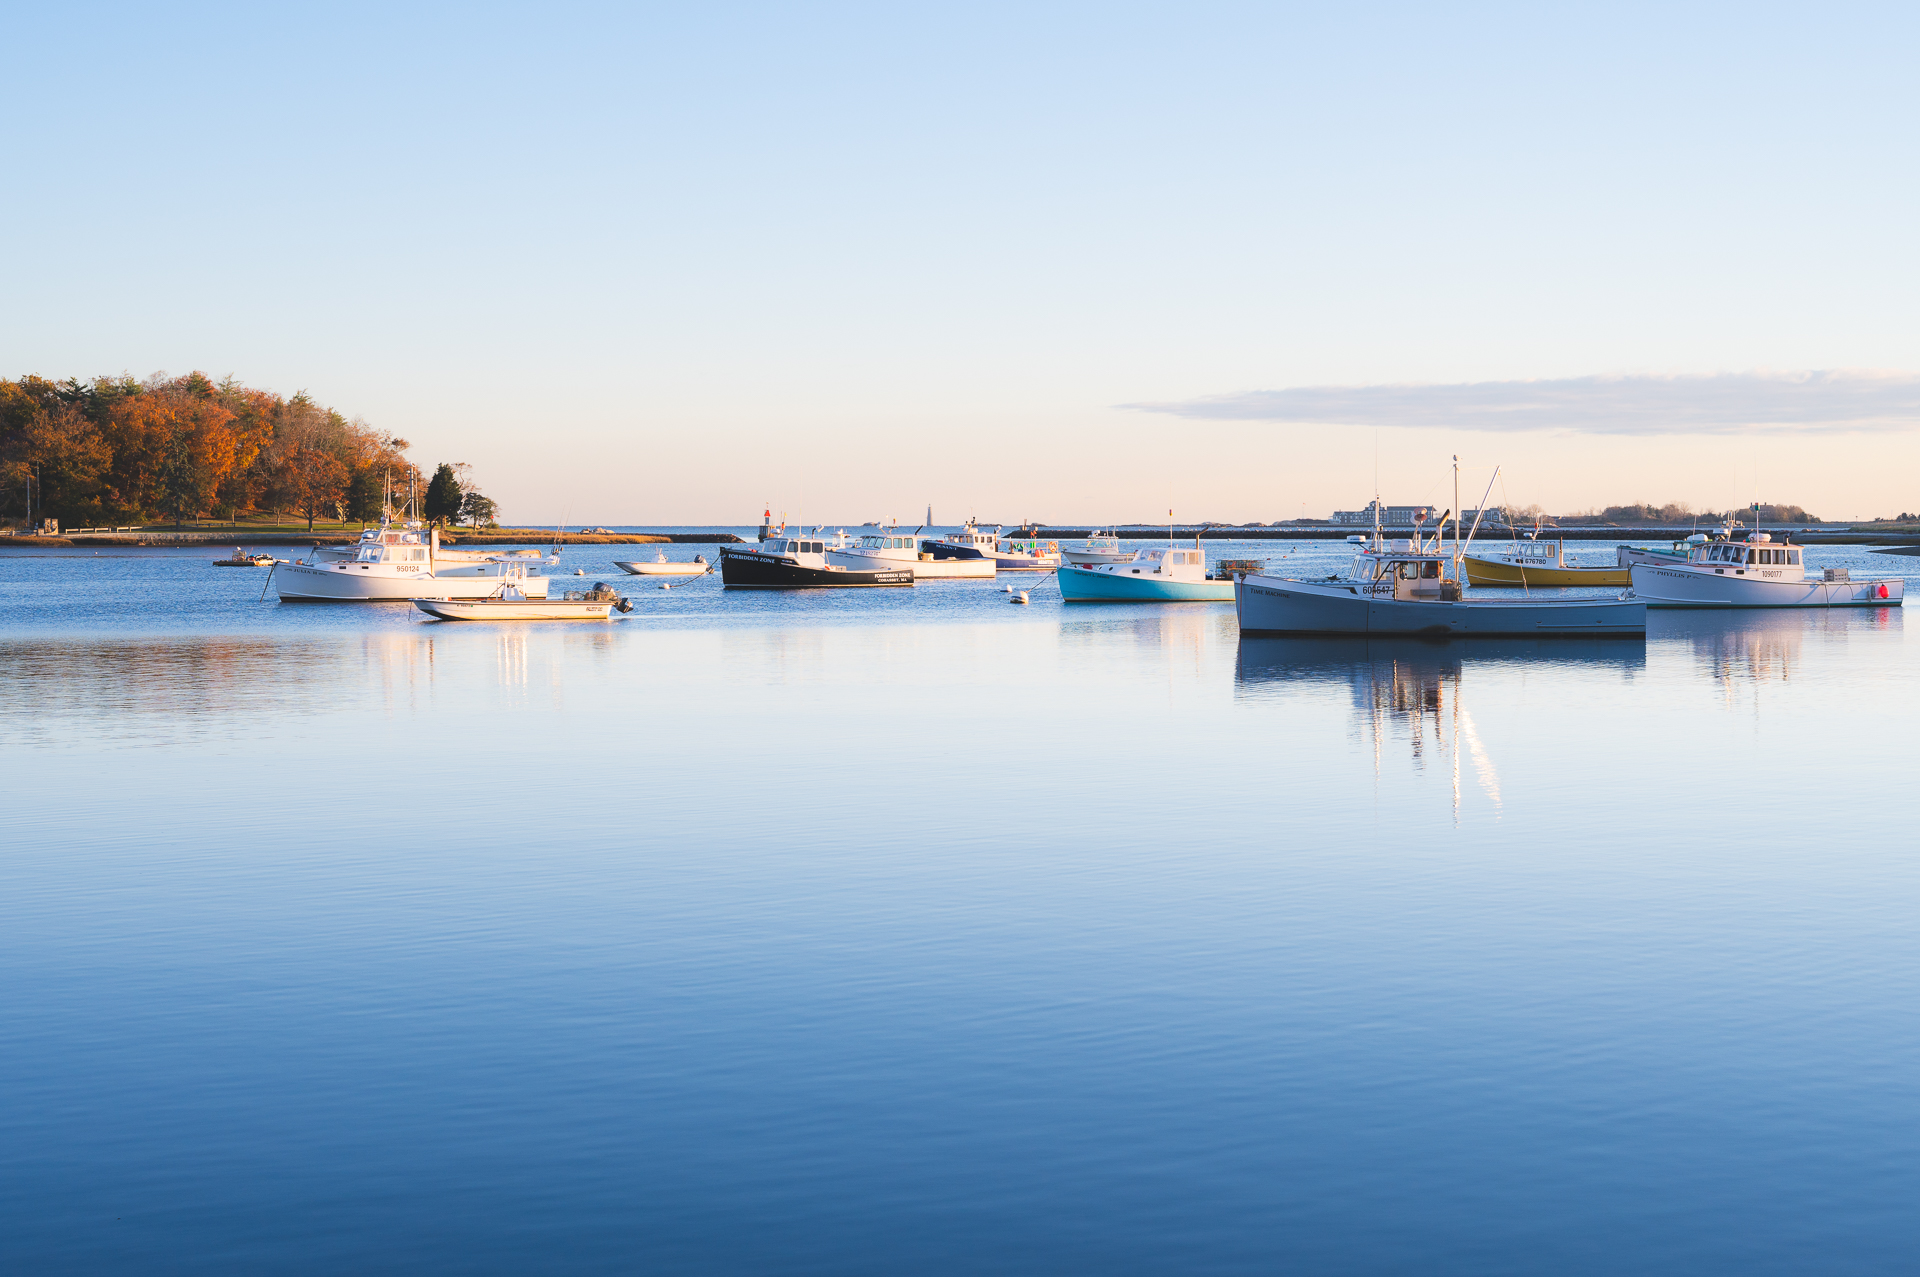 Boats at Cohasset Cove